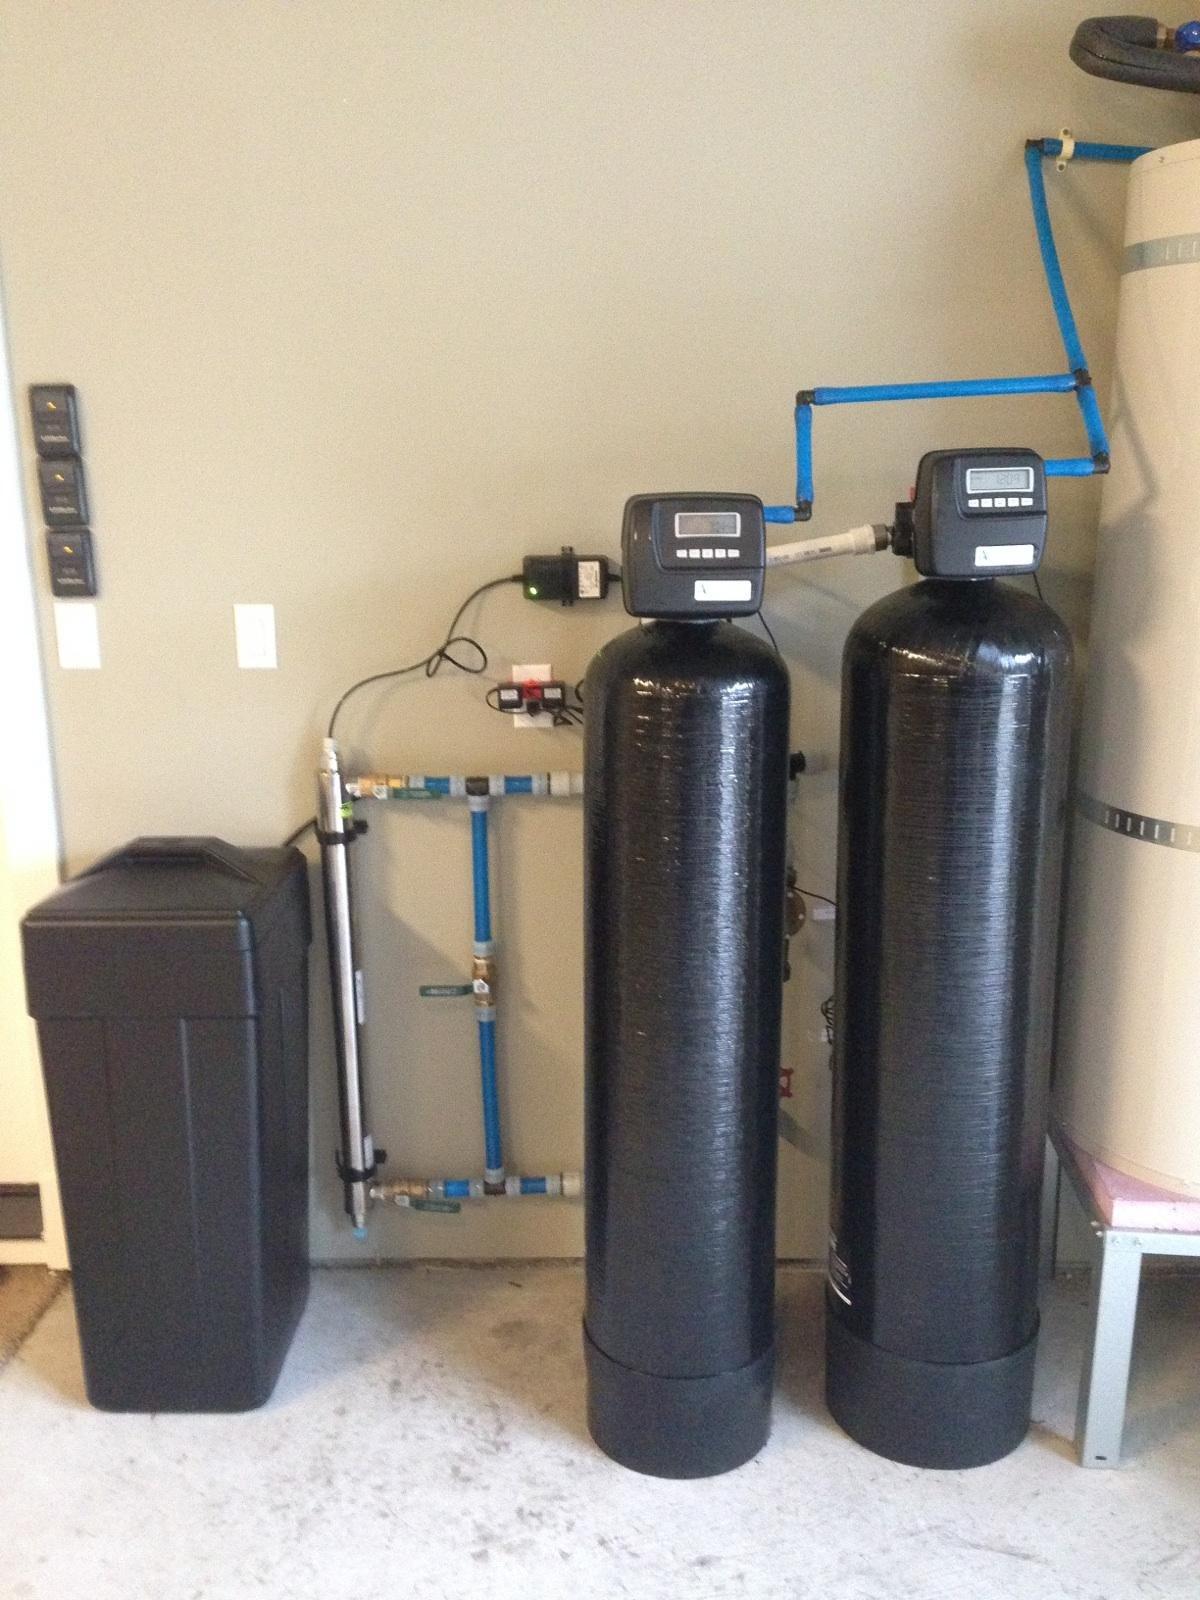 This community water system disinfects the water using ultra-violet (UV) light and removes water staining elements.